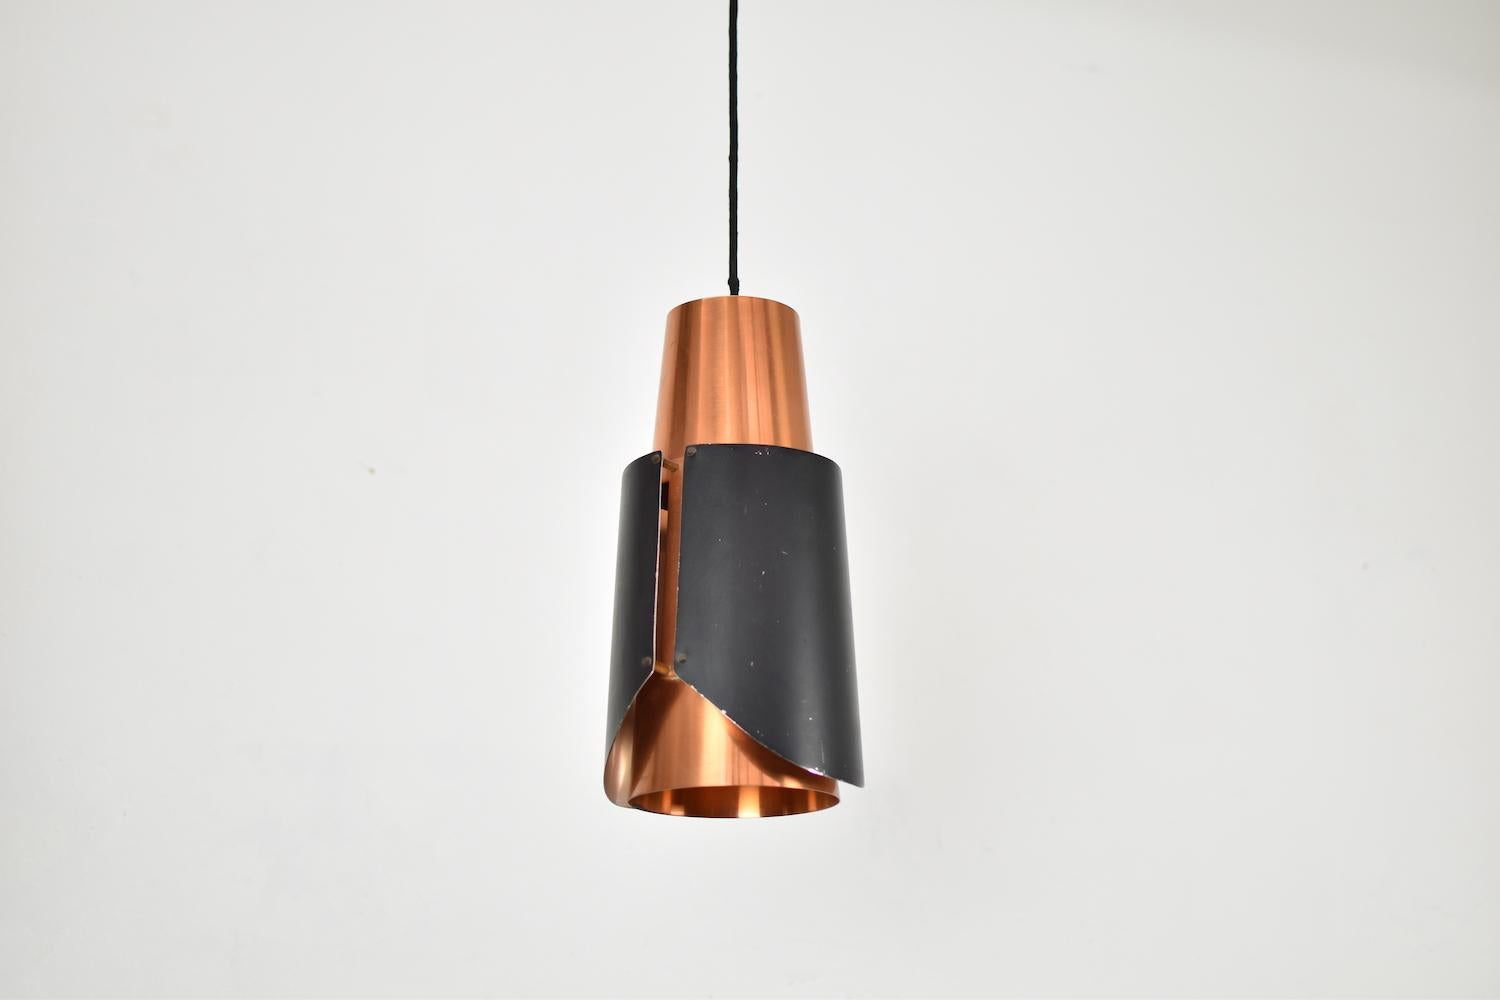 Great pair of ‘Østerport’ pendants by Bent Karlby for Lyfa, Denmark, 1960s. The lamp shades are made of thin copper and lacquered metal. Very good original condition with norma signs of wear. Quite rare!